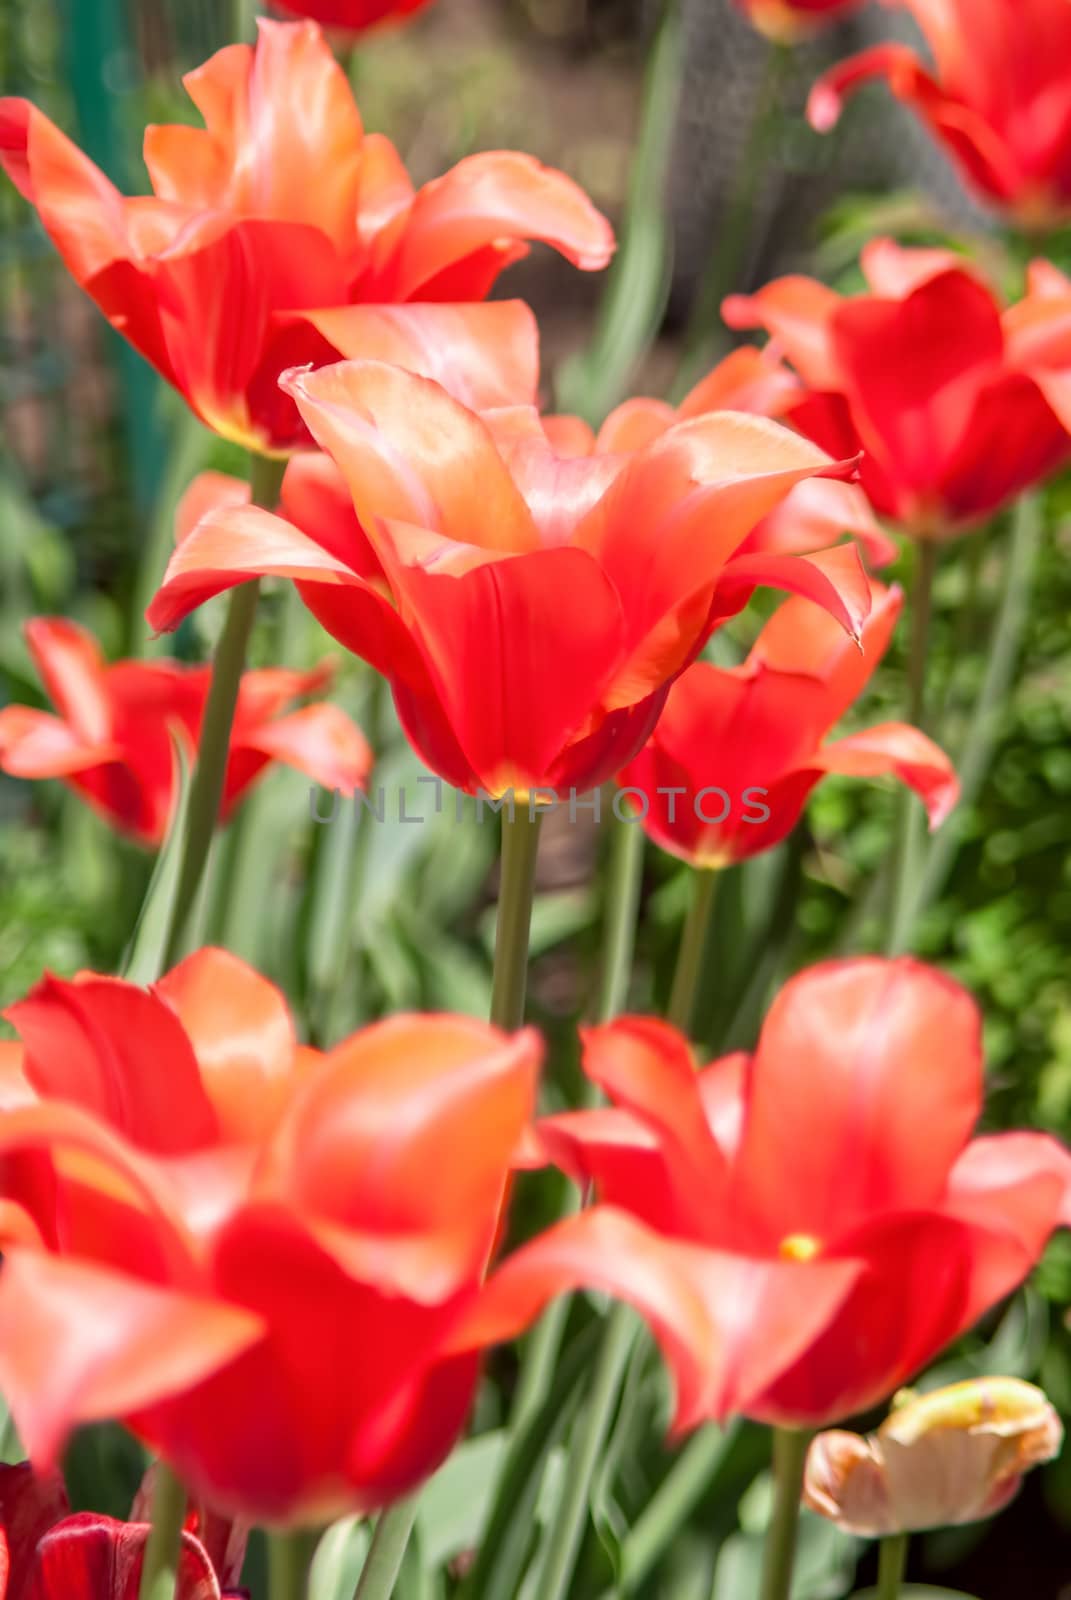 Red tulips by Zhukow